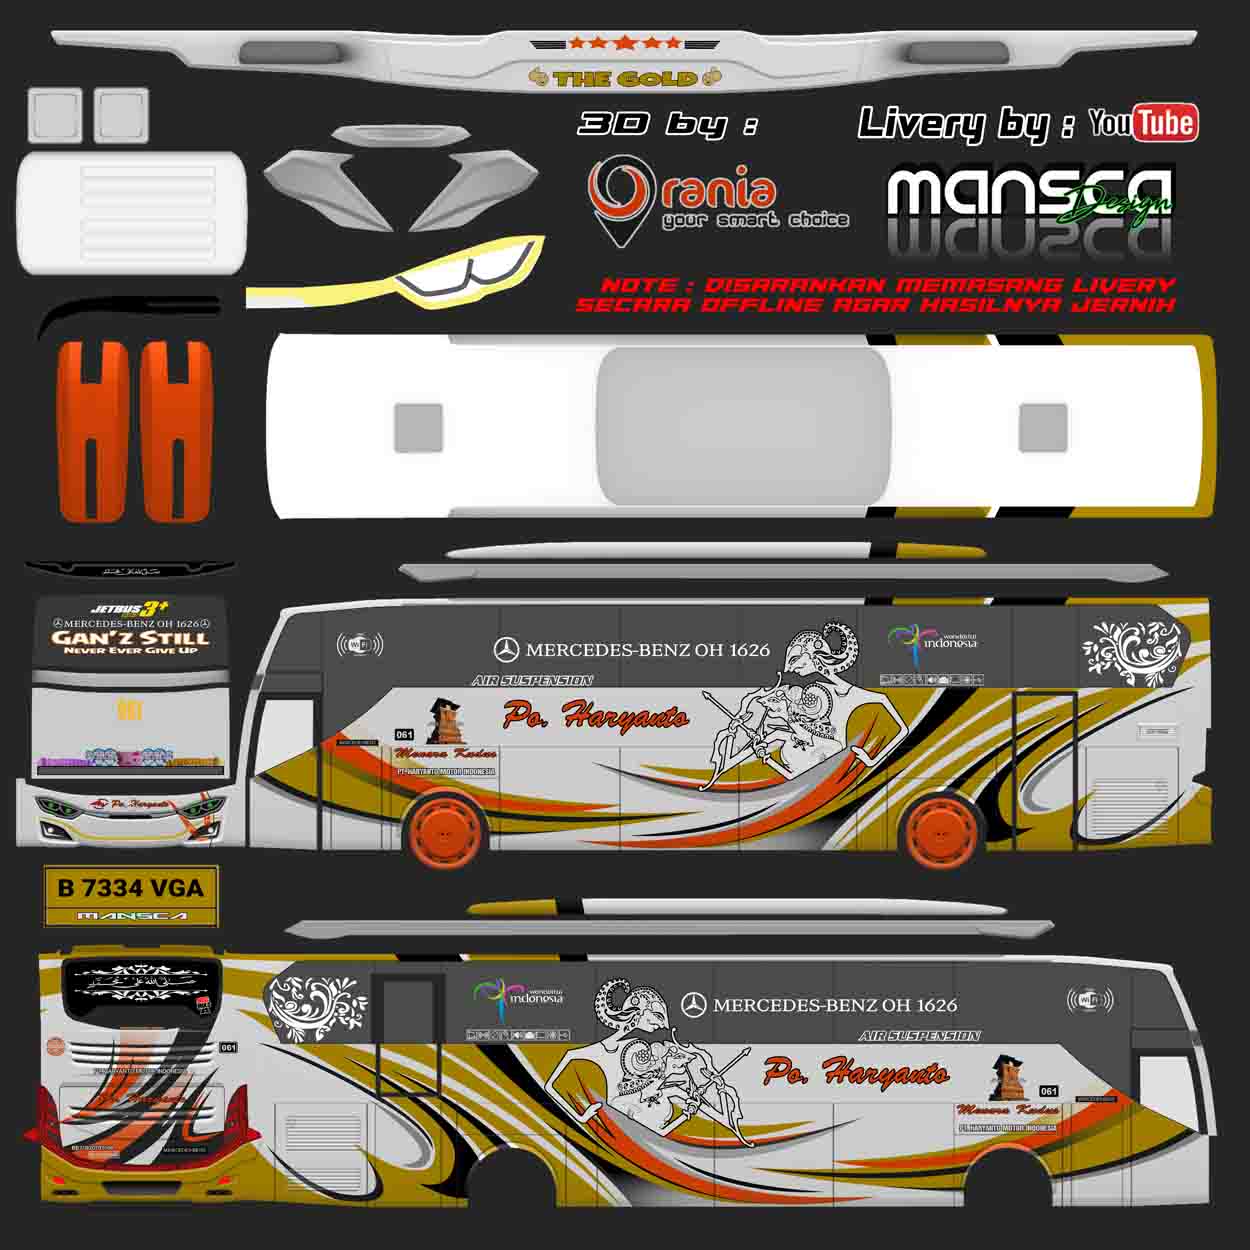 download livery bussid haryanto